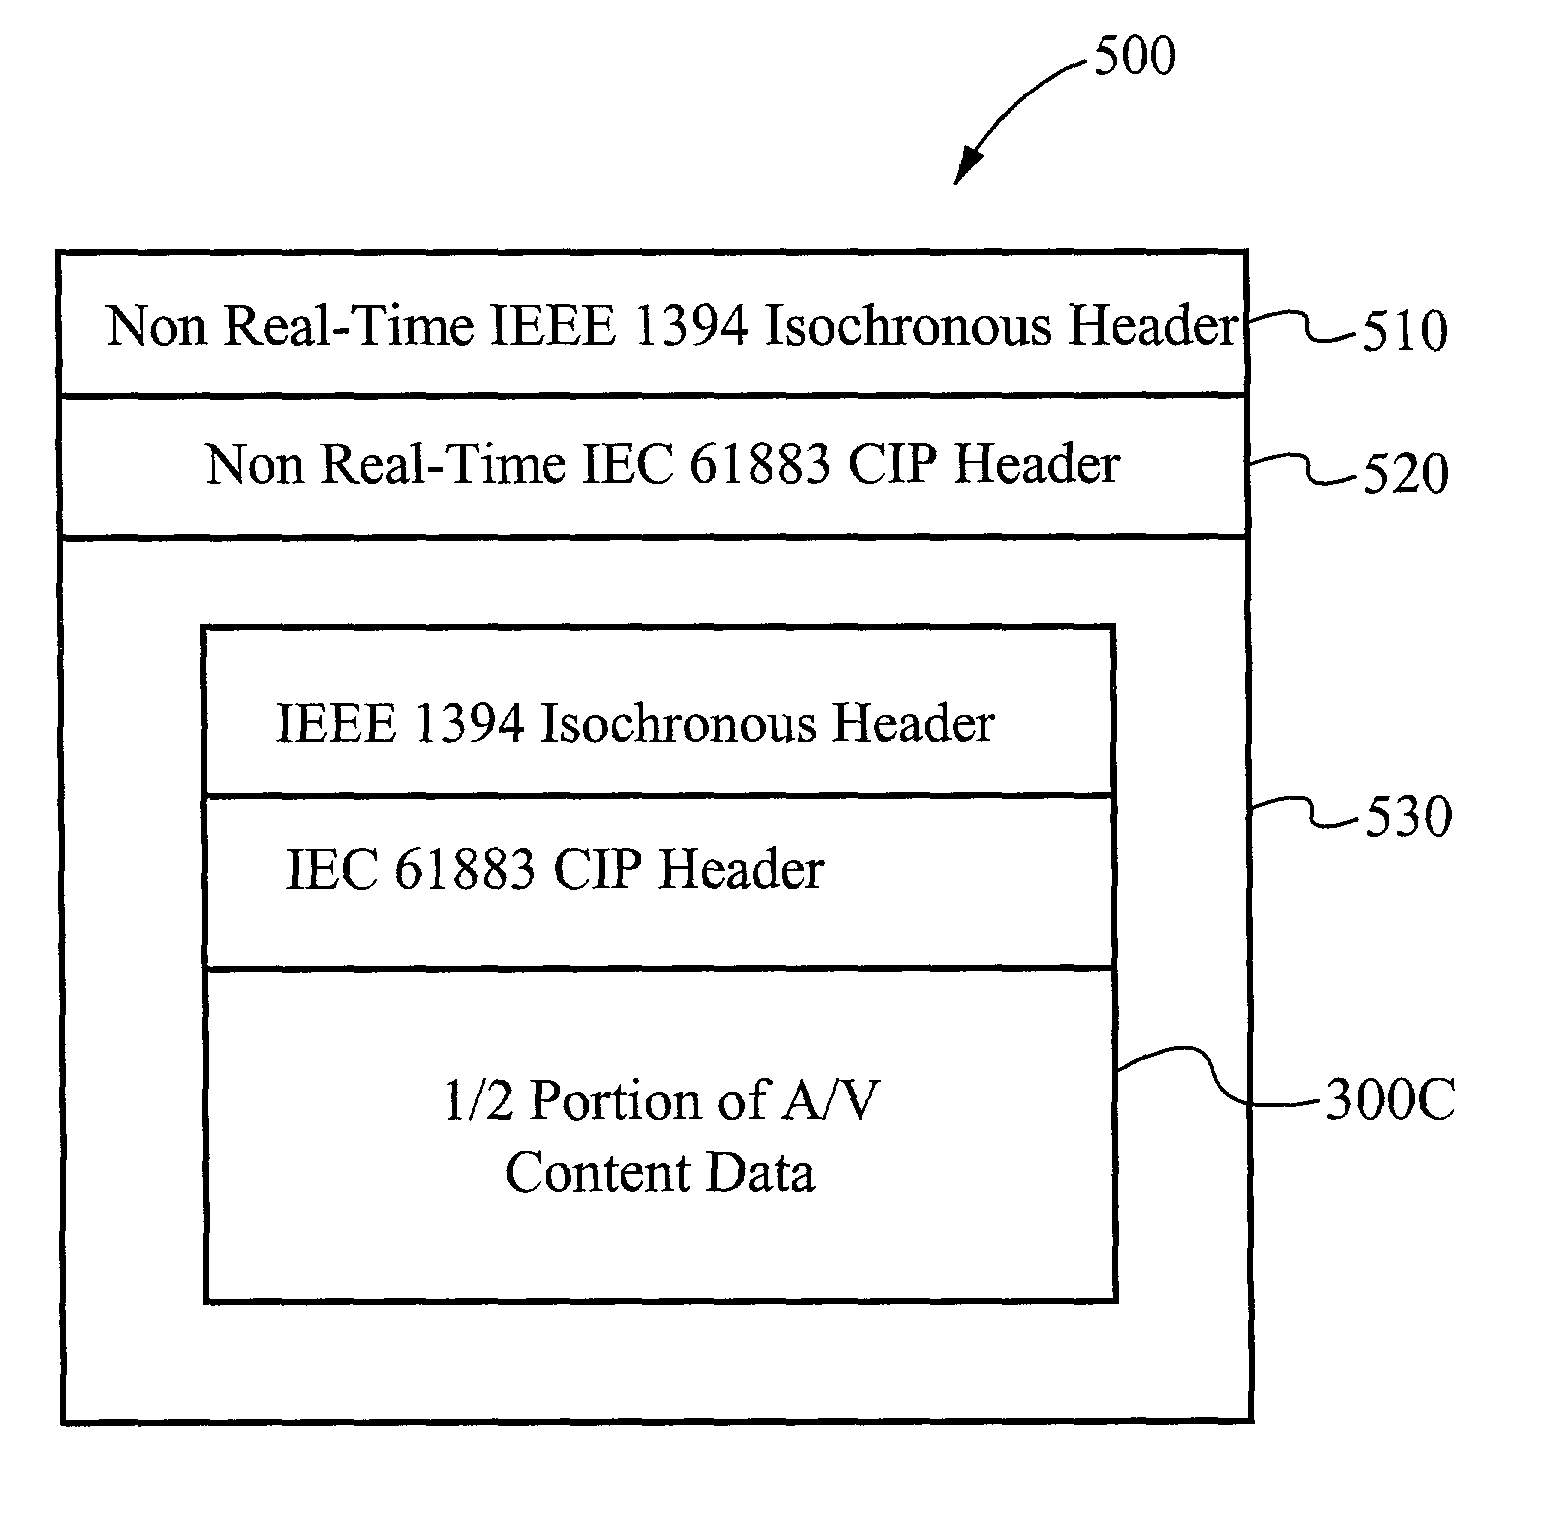 Method of flow control for data transported using isochronous packets over an IEEE 1394-2000 serial bus network